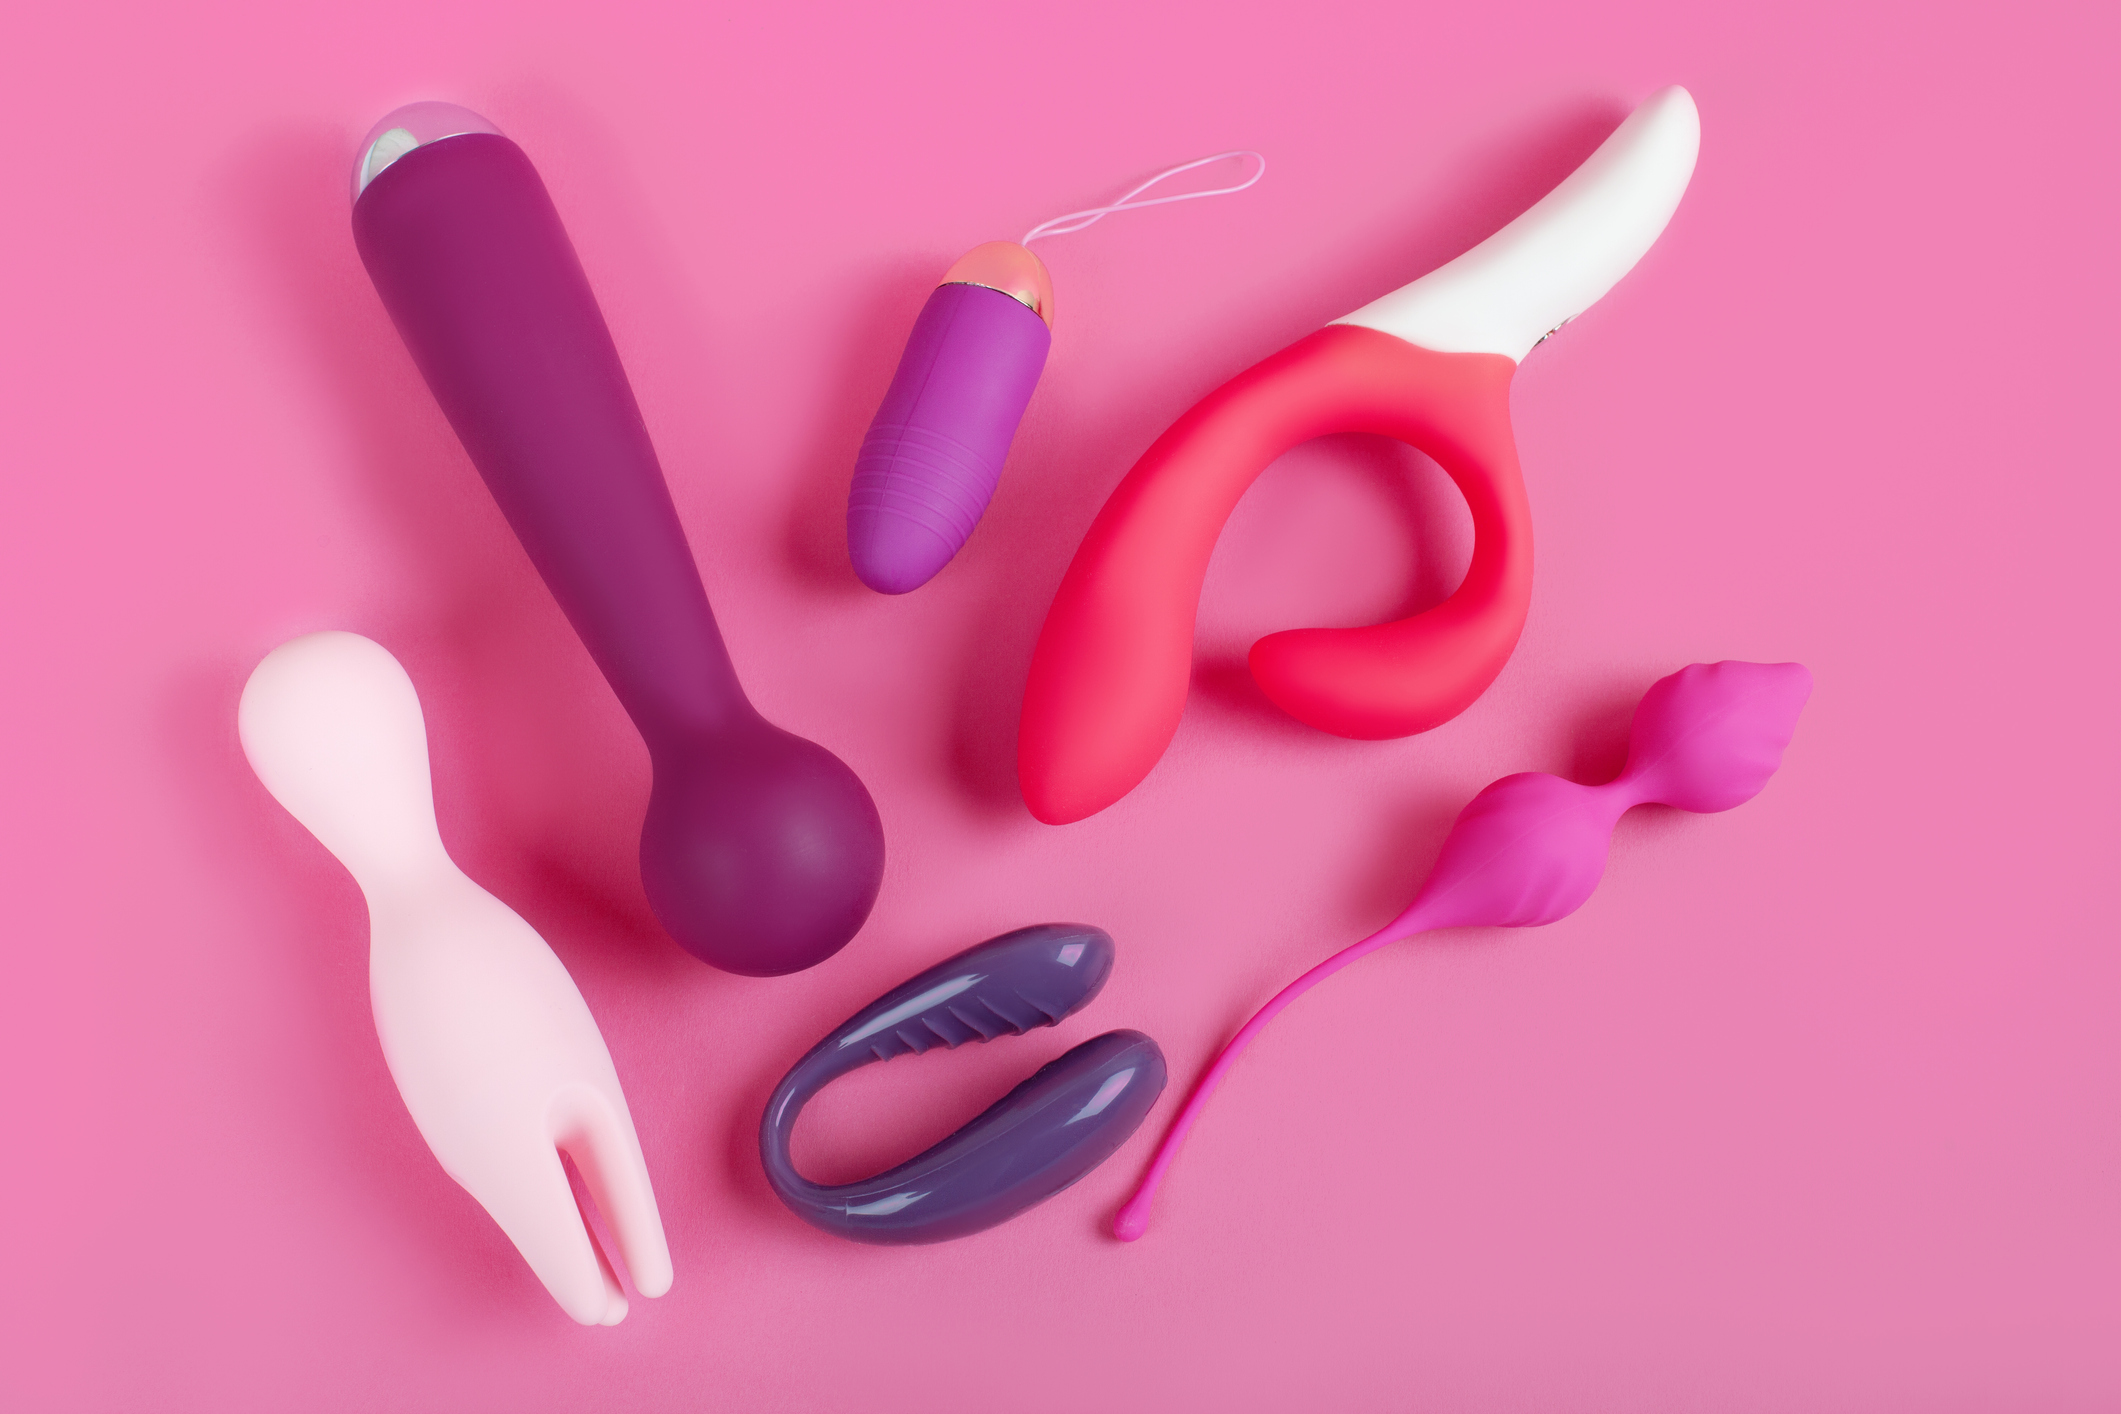 How to clean sex toys the body-safe way Woman and Home